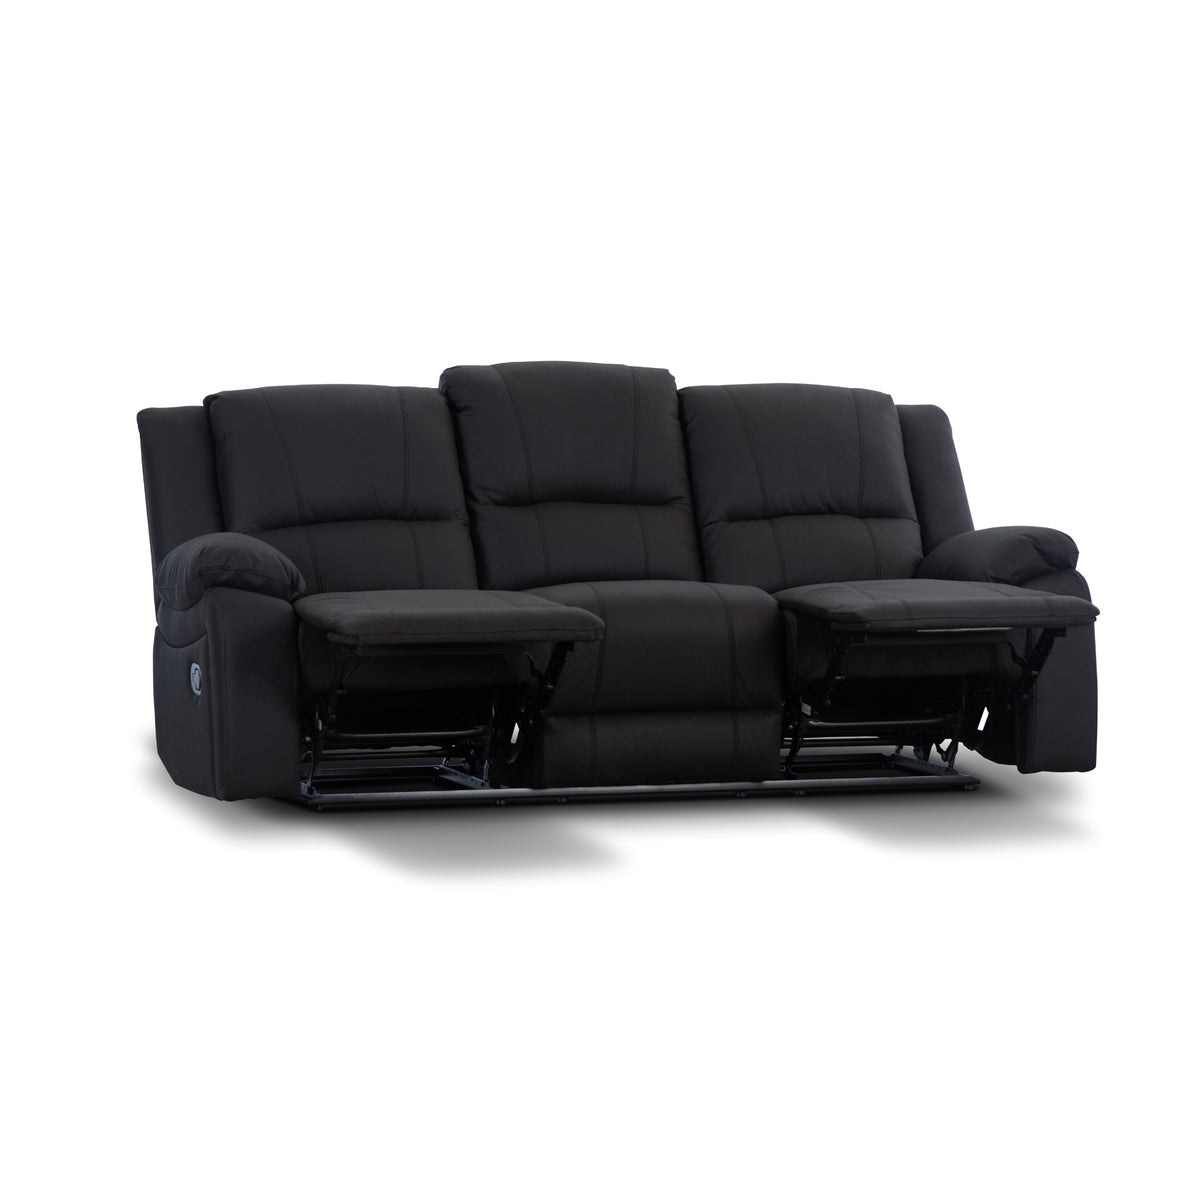 Anderson Fabric Electric Recliner Sofa Lounge Chair ONYX Black 1 + 3 Seater